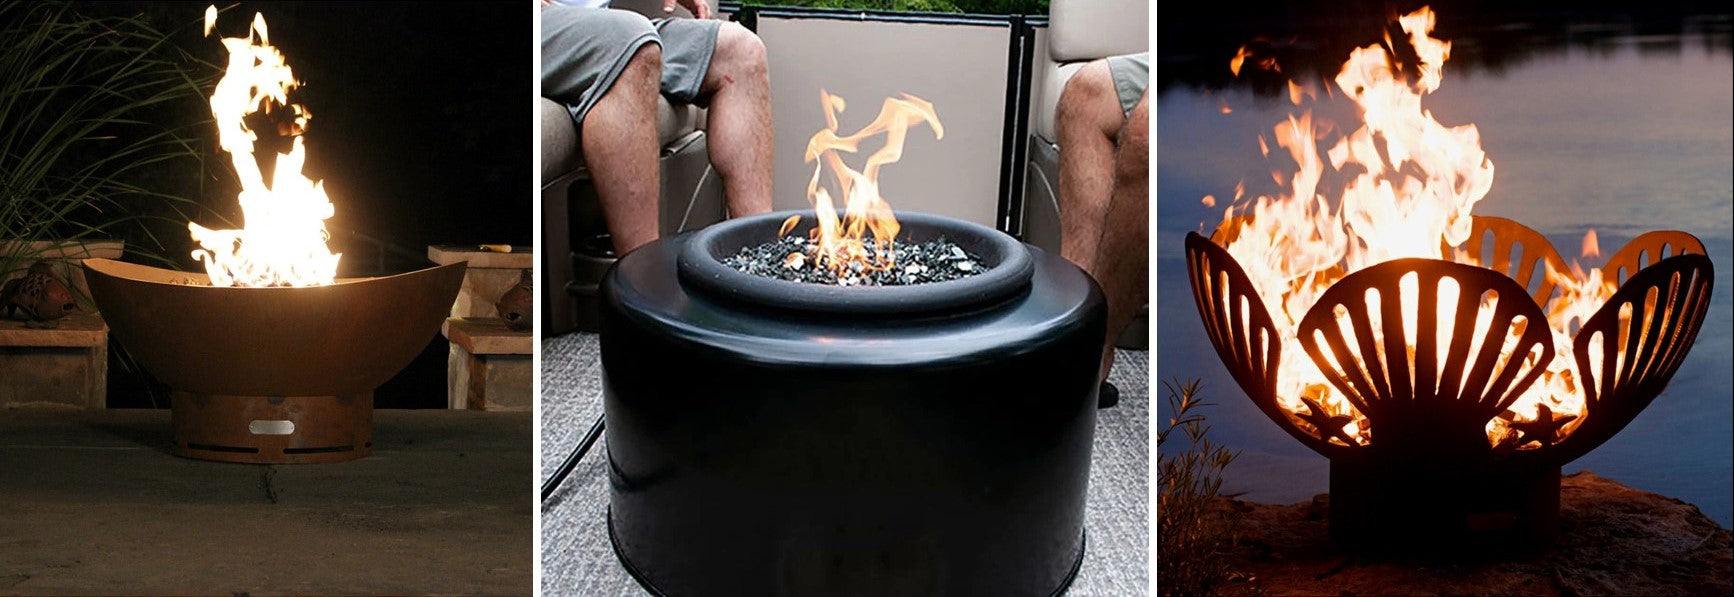 Outdoor Fire Pits - Majestic Fountains and More